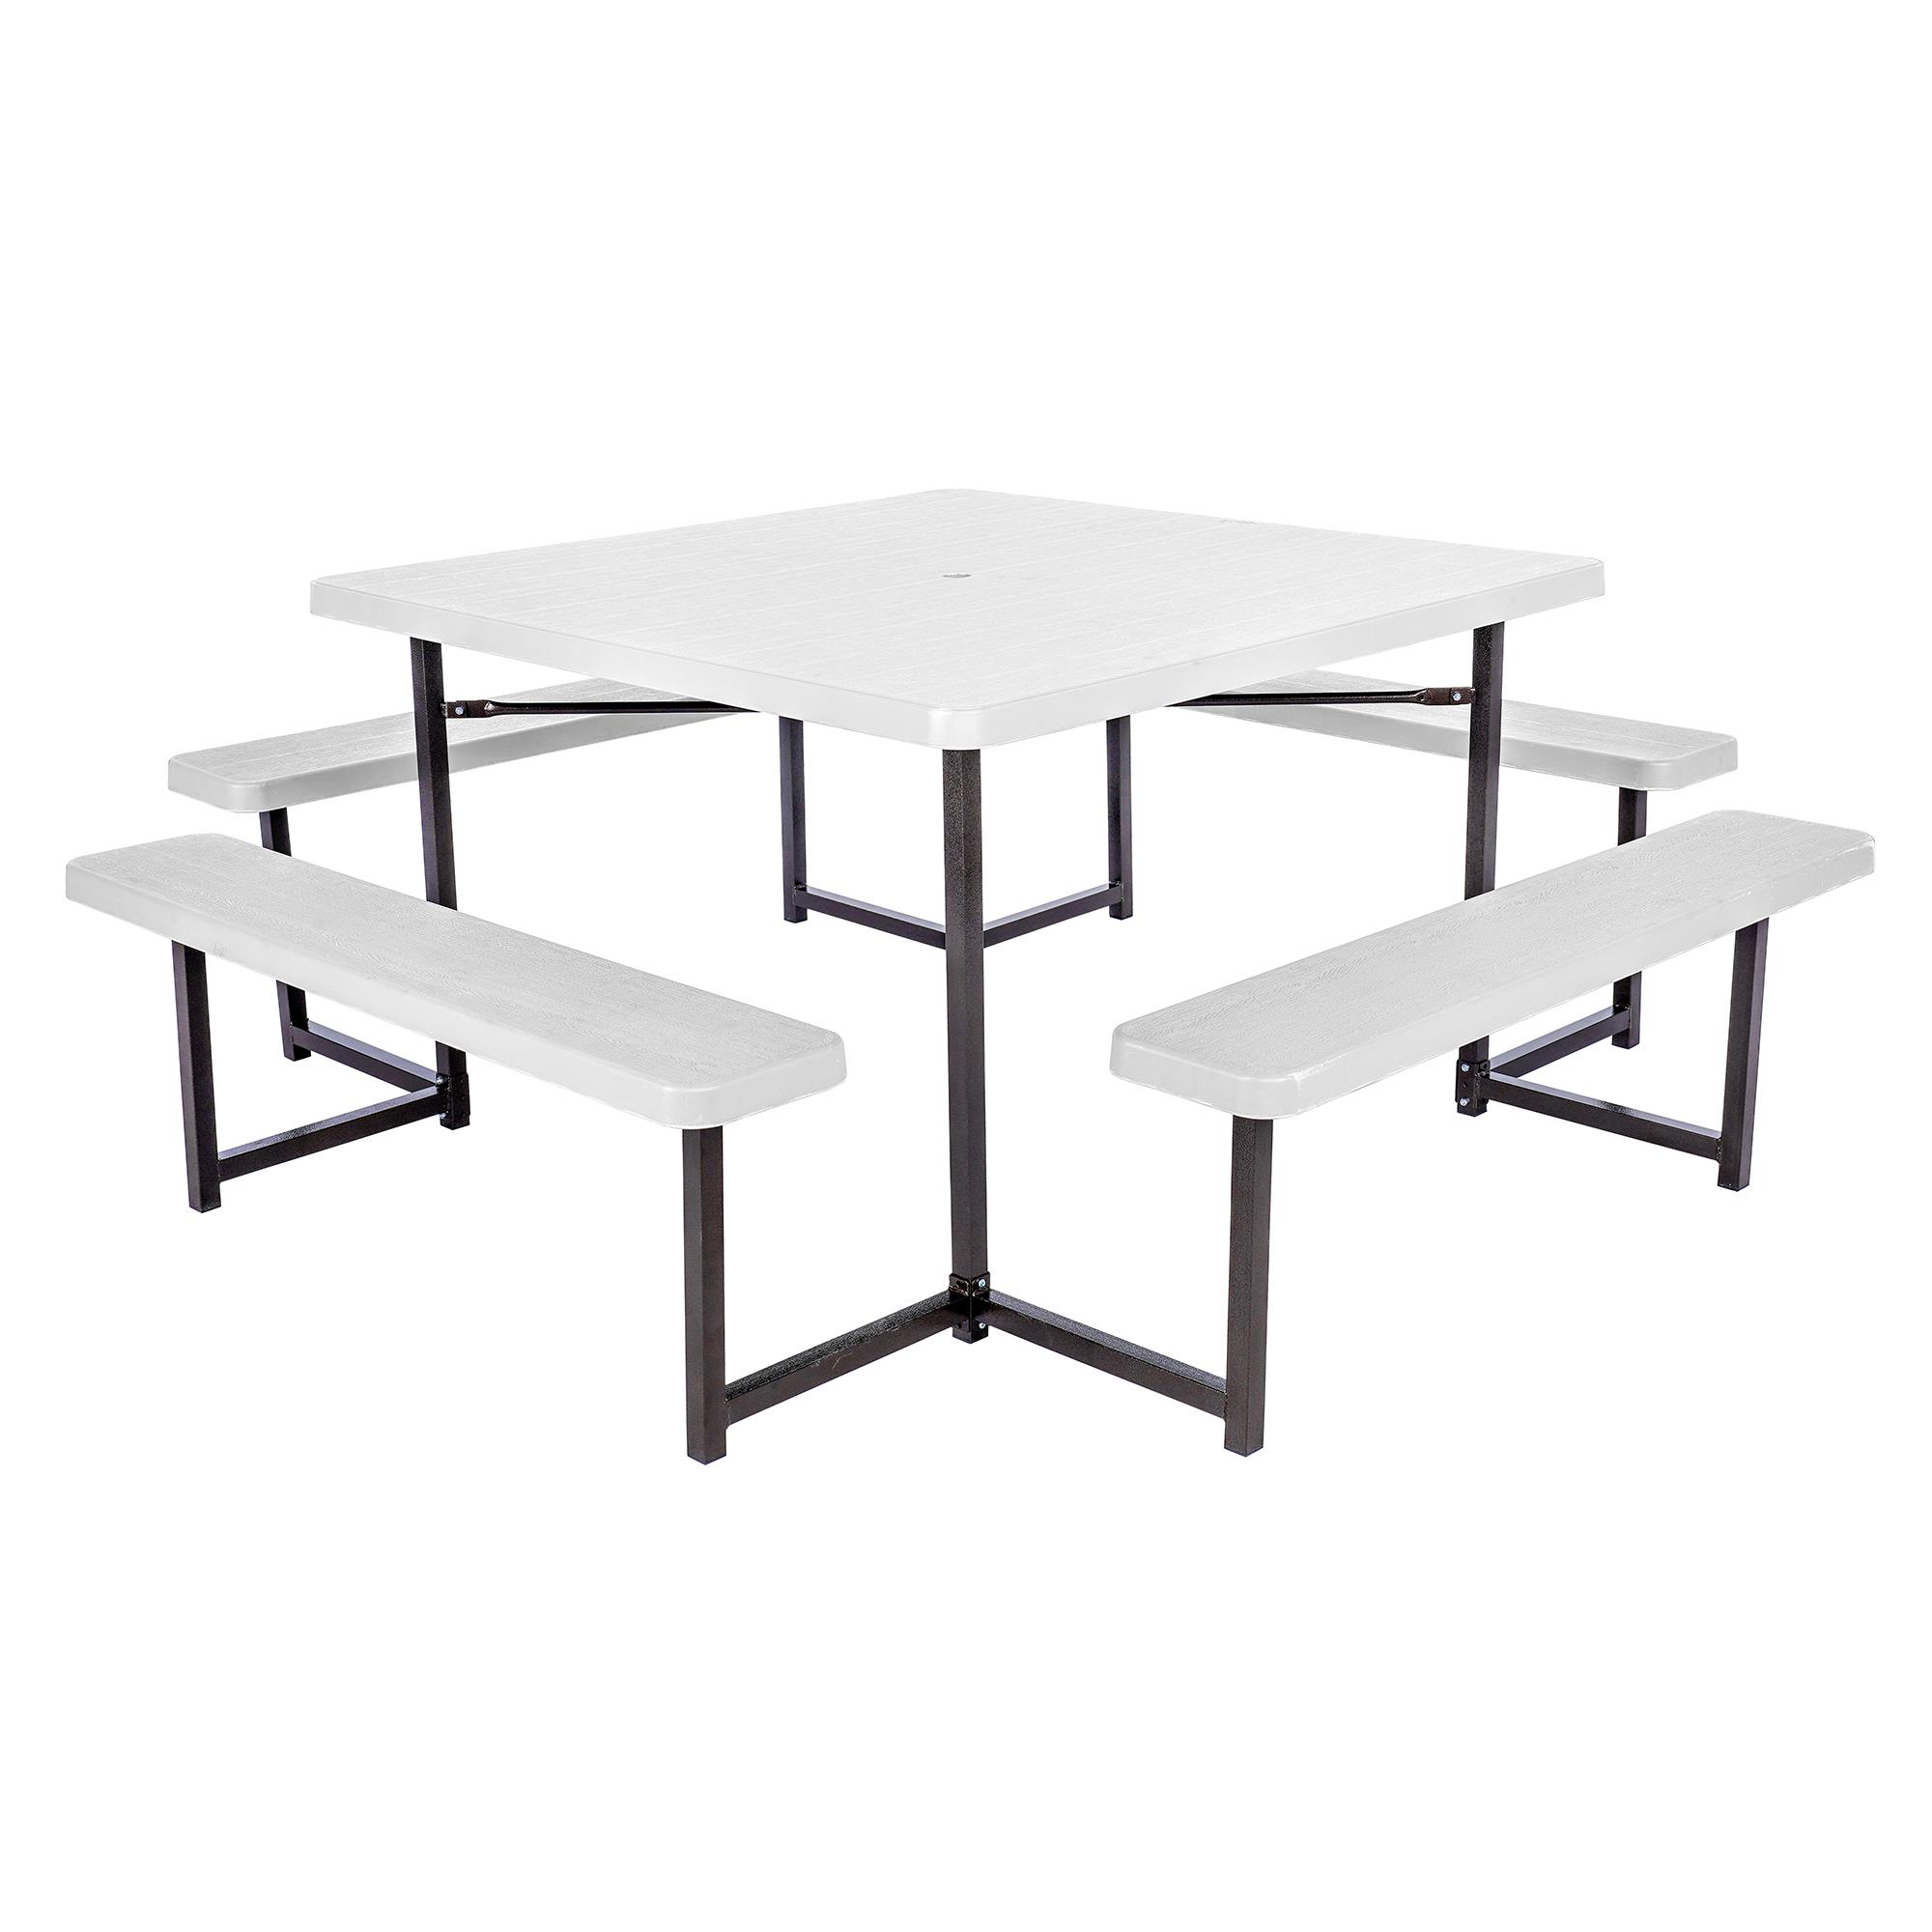 48-inch Square Picnic Table with Benches